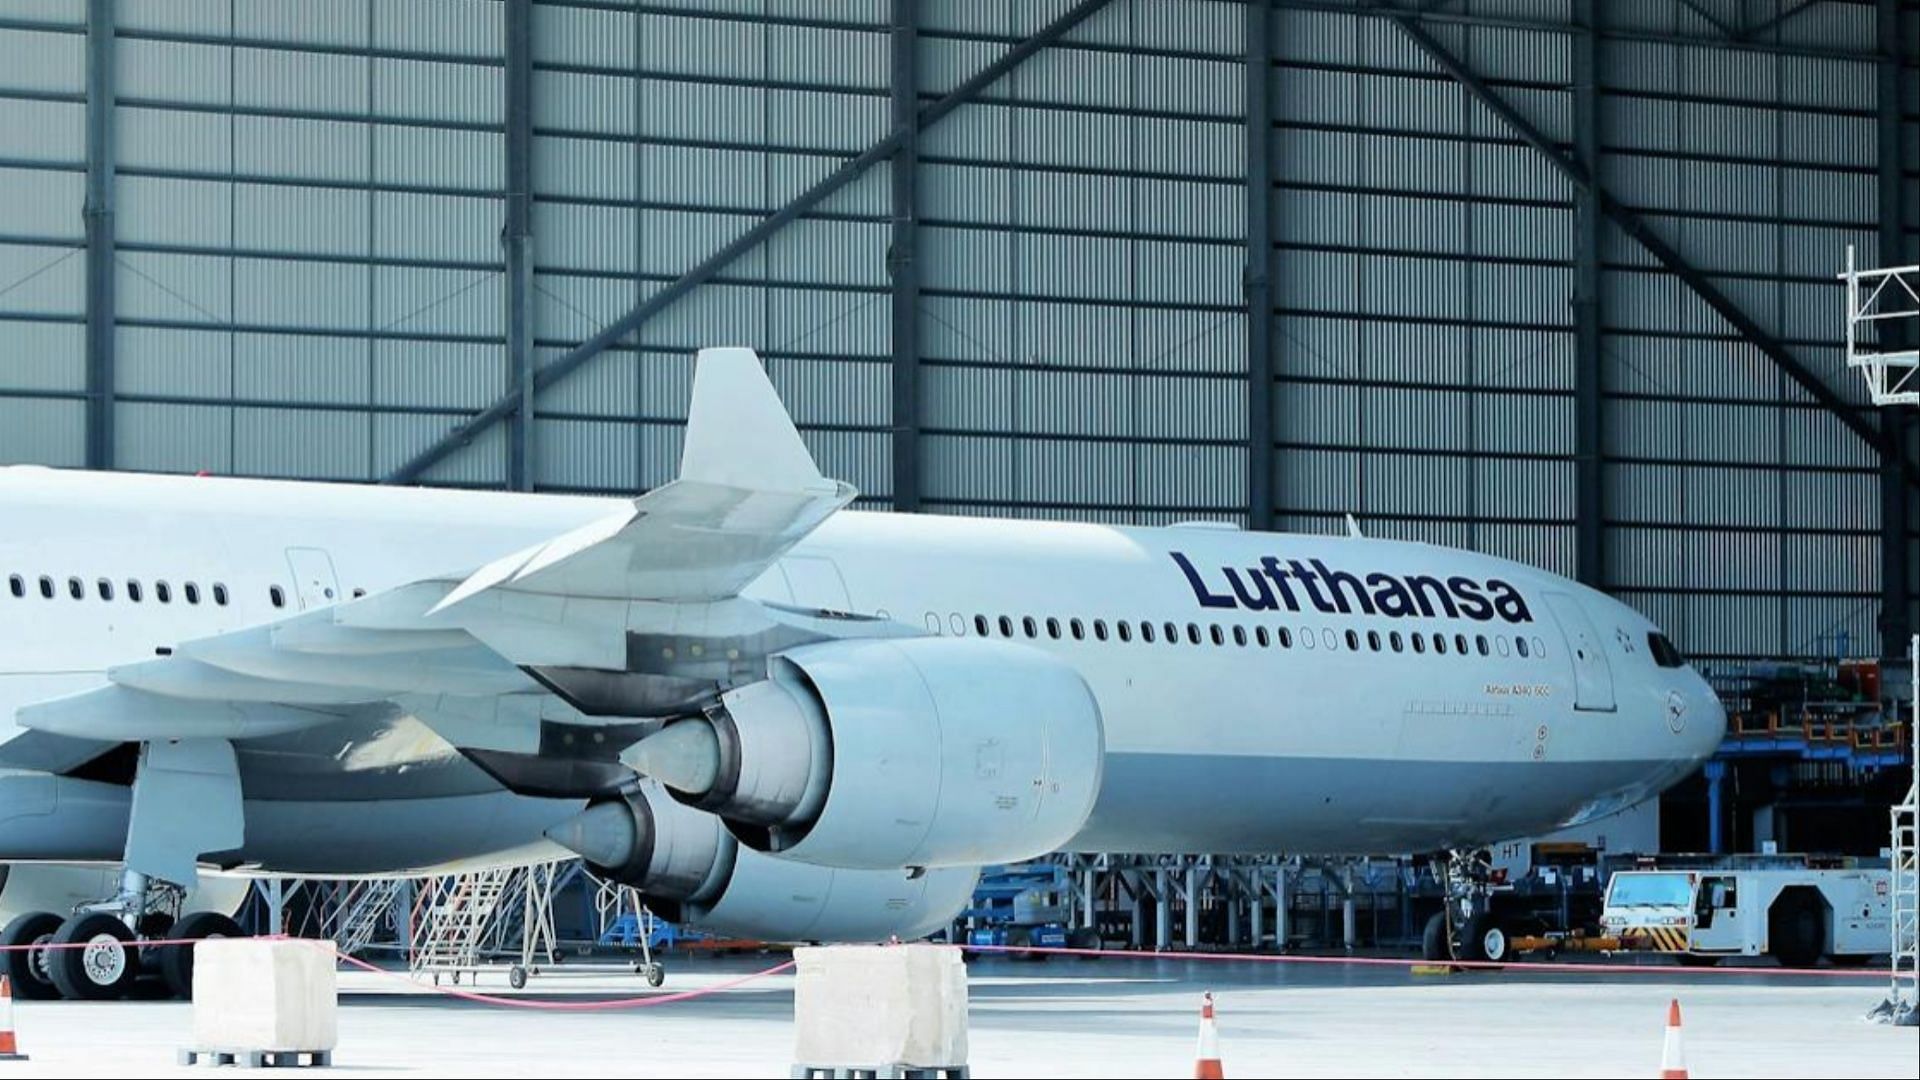 A man recently died on a Lufthansa plane (Image via Pexels)